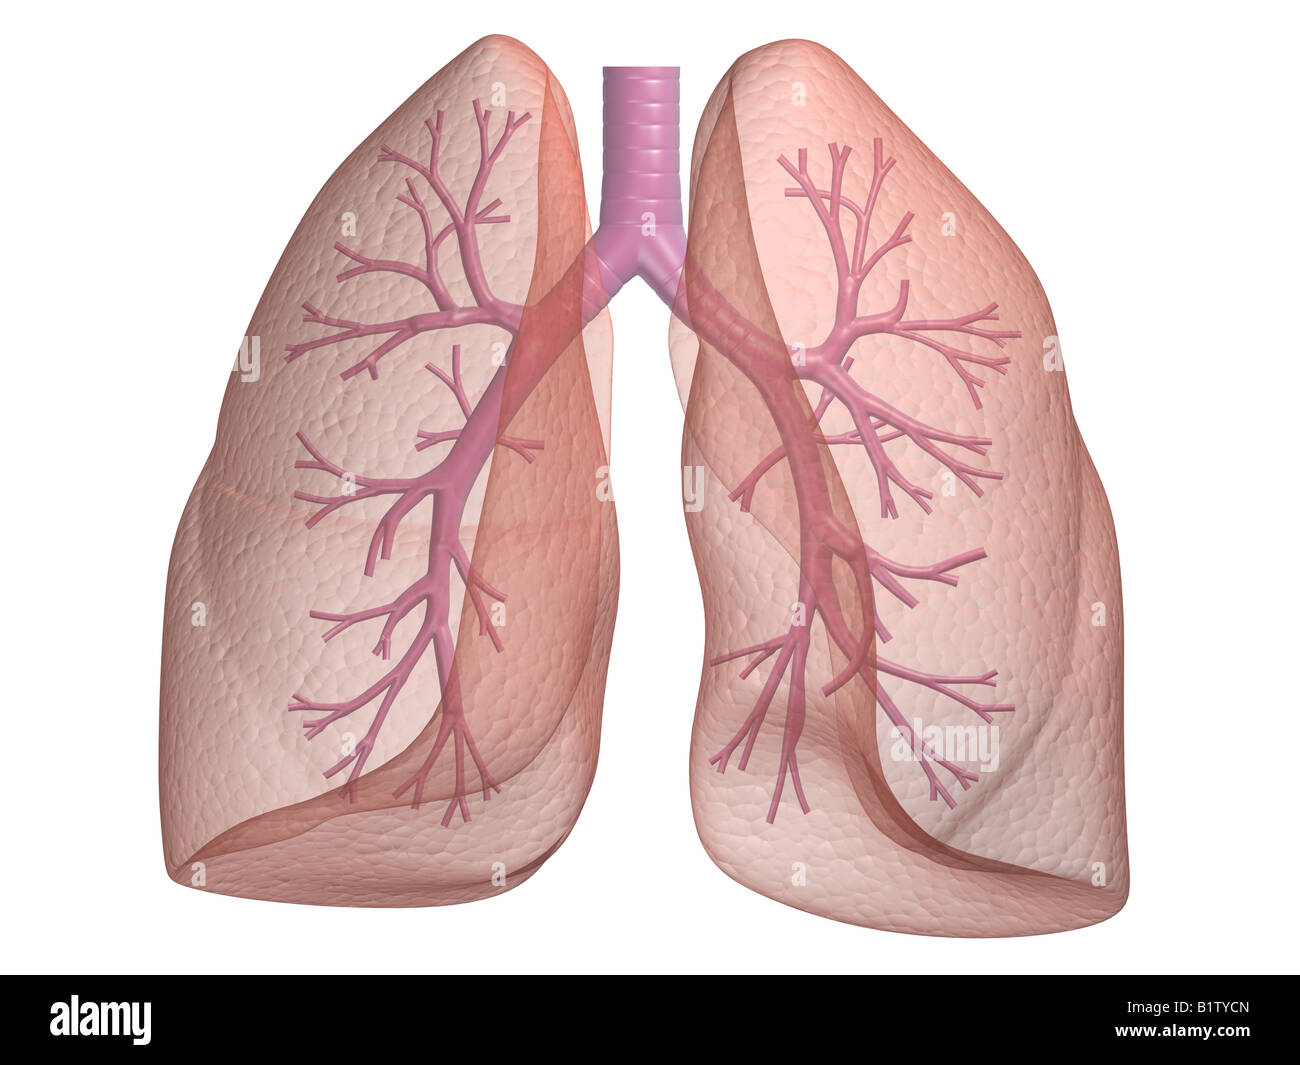 lung and bronchi Stock Photo